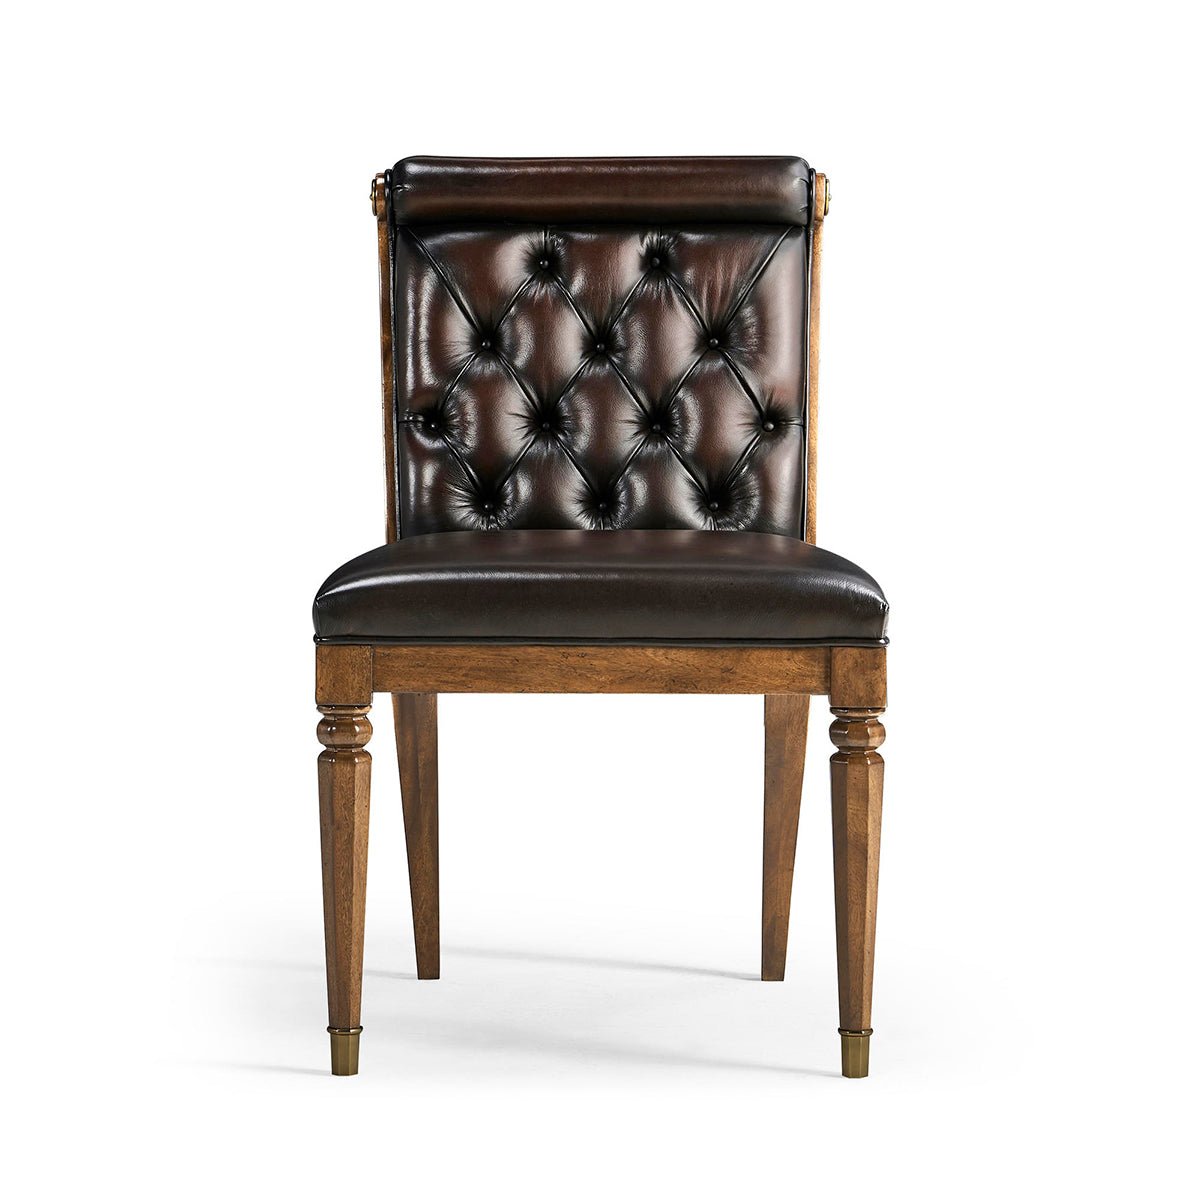 Classic Leather Tufted Dining Chair - English Georgian America